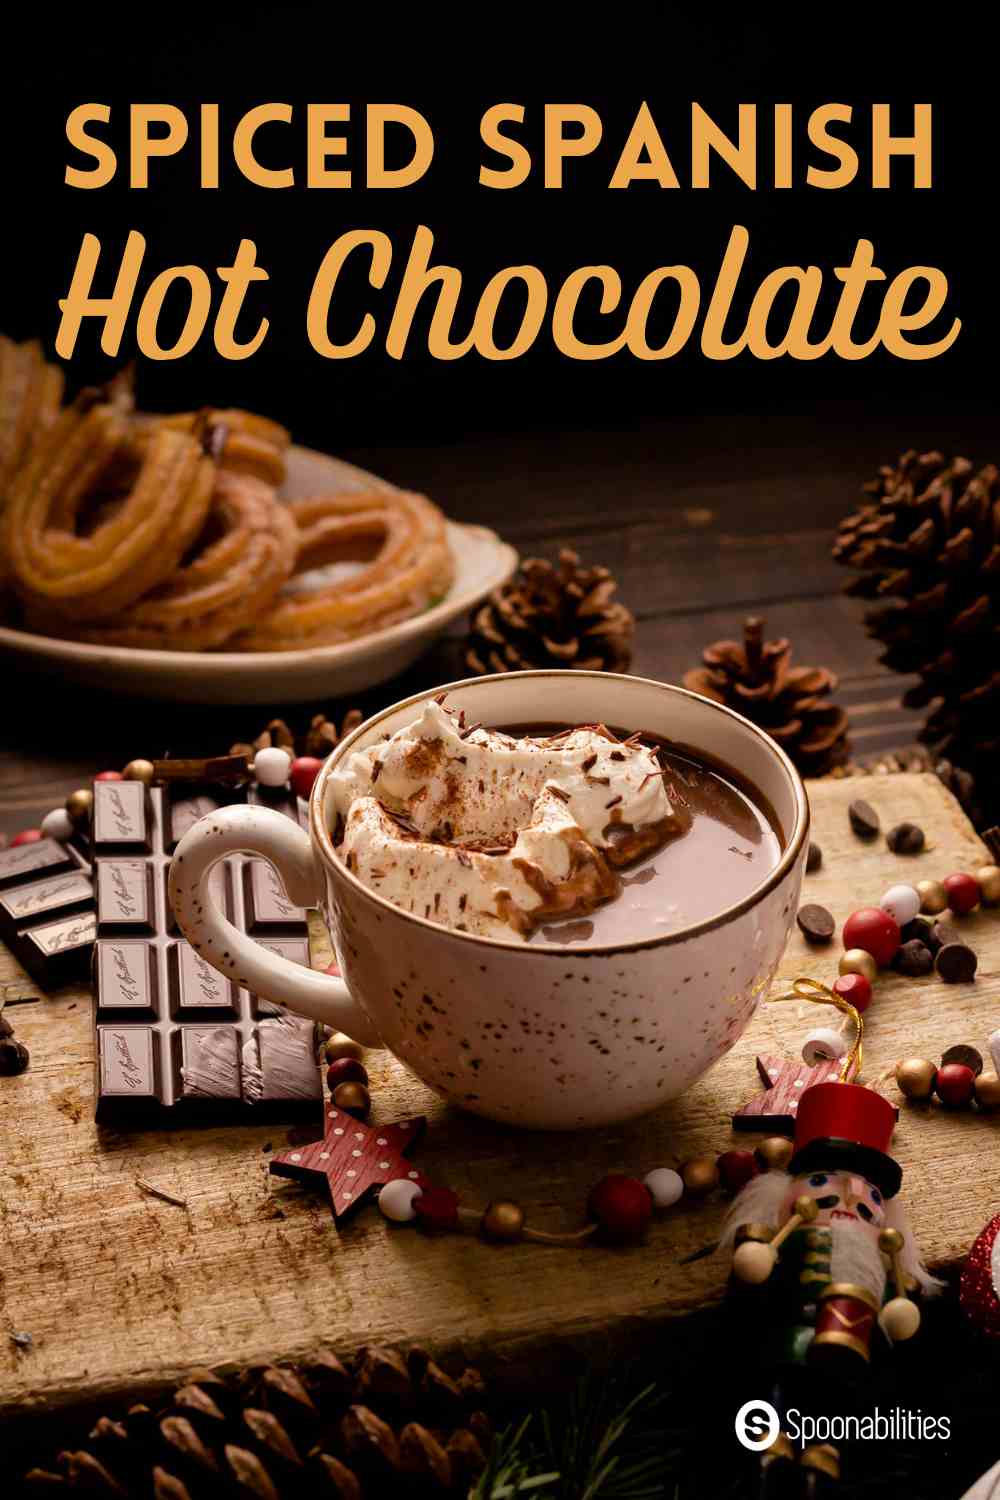 A cup of Spanish hot chocolate with churros in the background among chocolate bars and chips and Christmas holiday ornaments